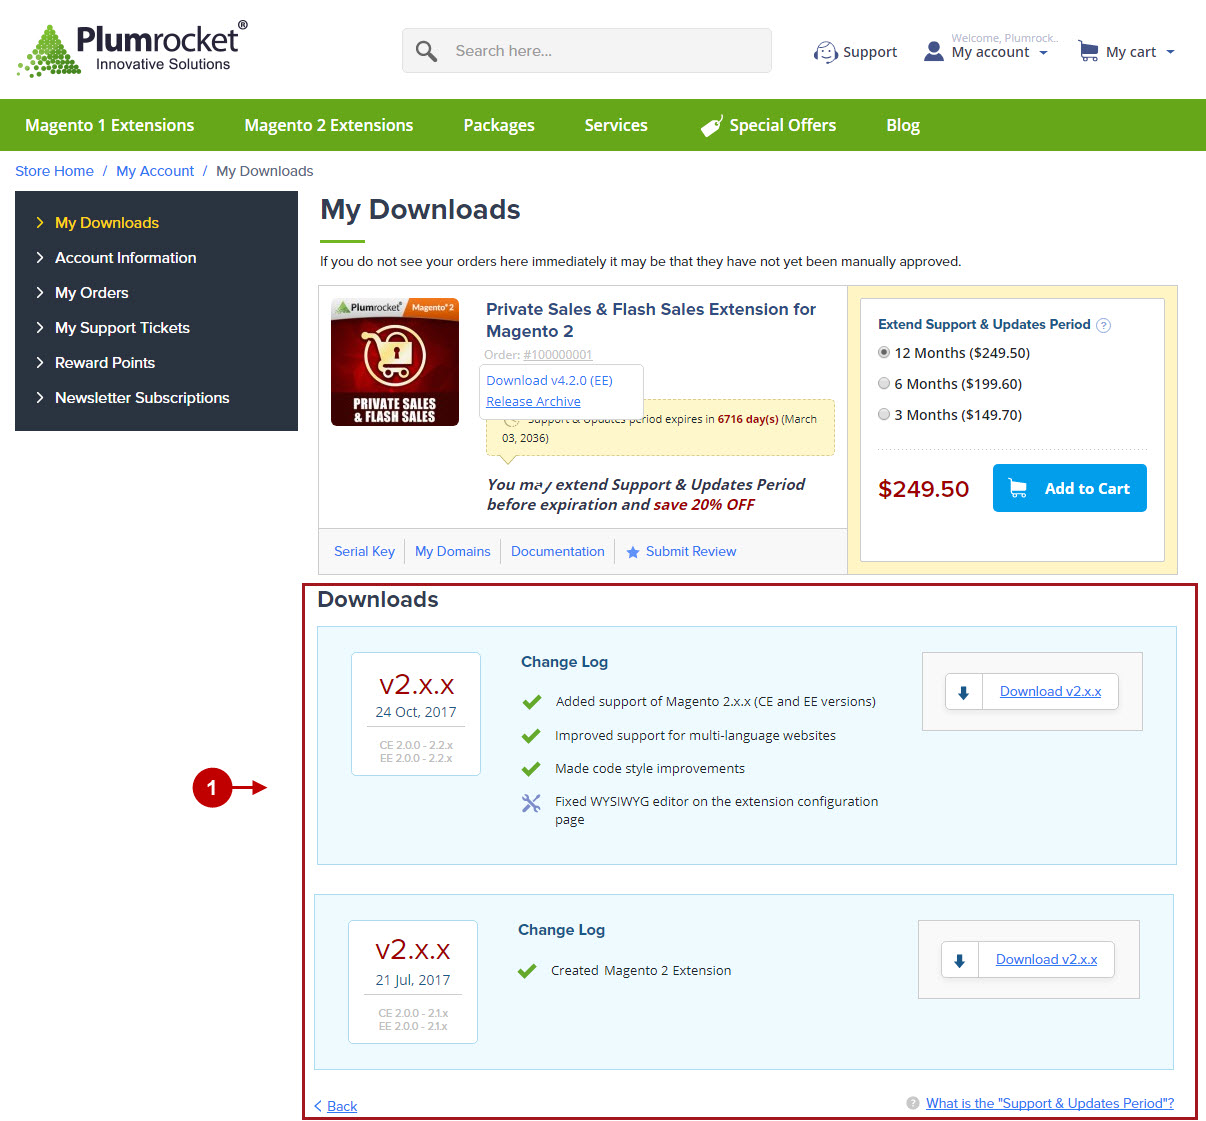 Magento 2 update private sales and flash sales extension release archive updt.jpg